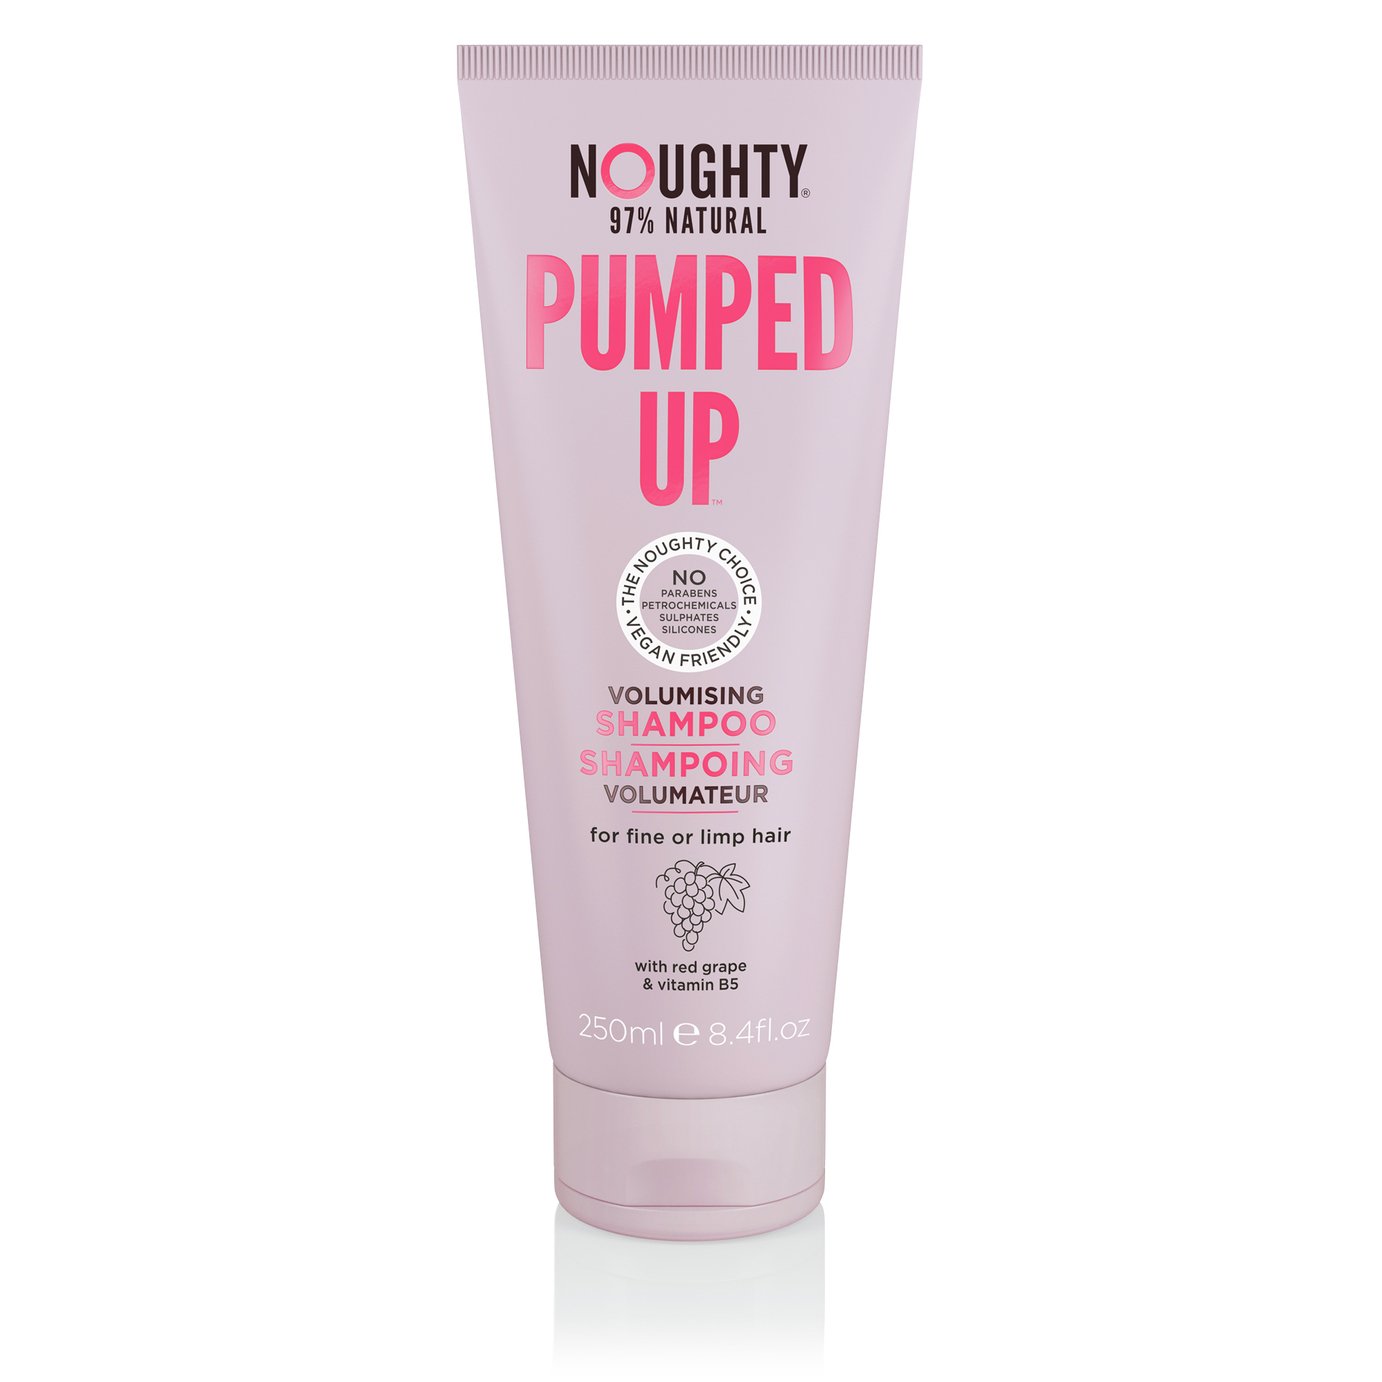 Noughty Pumped Up Shampoo - 250ml